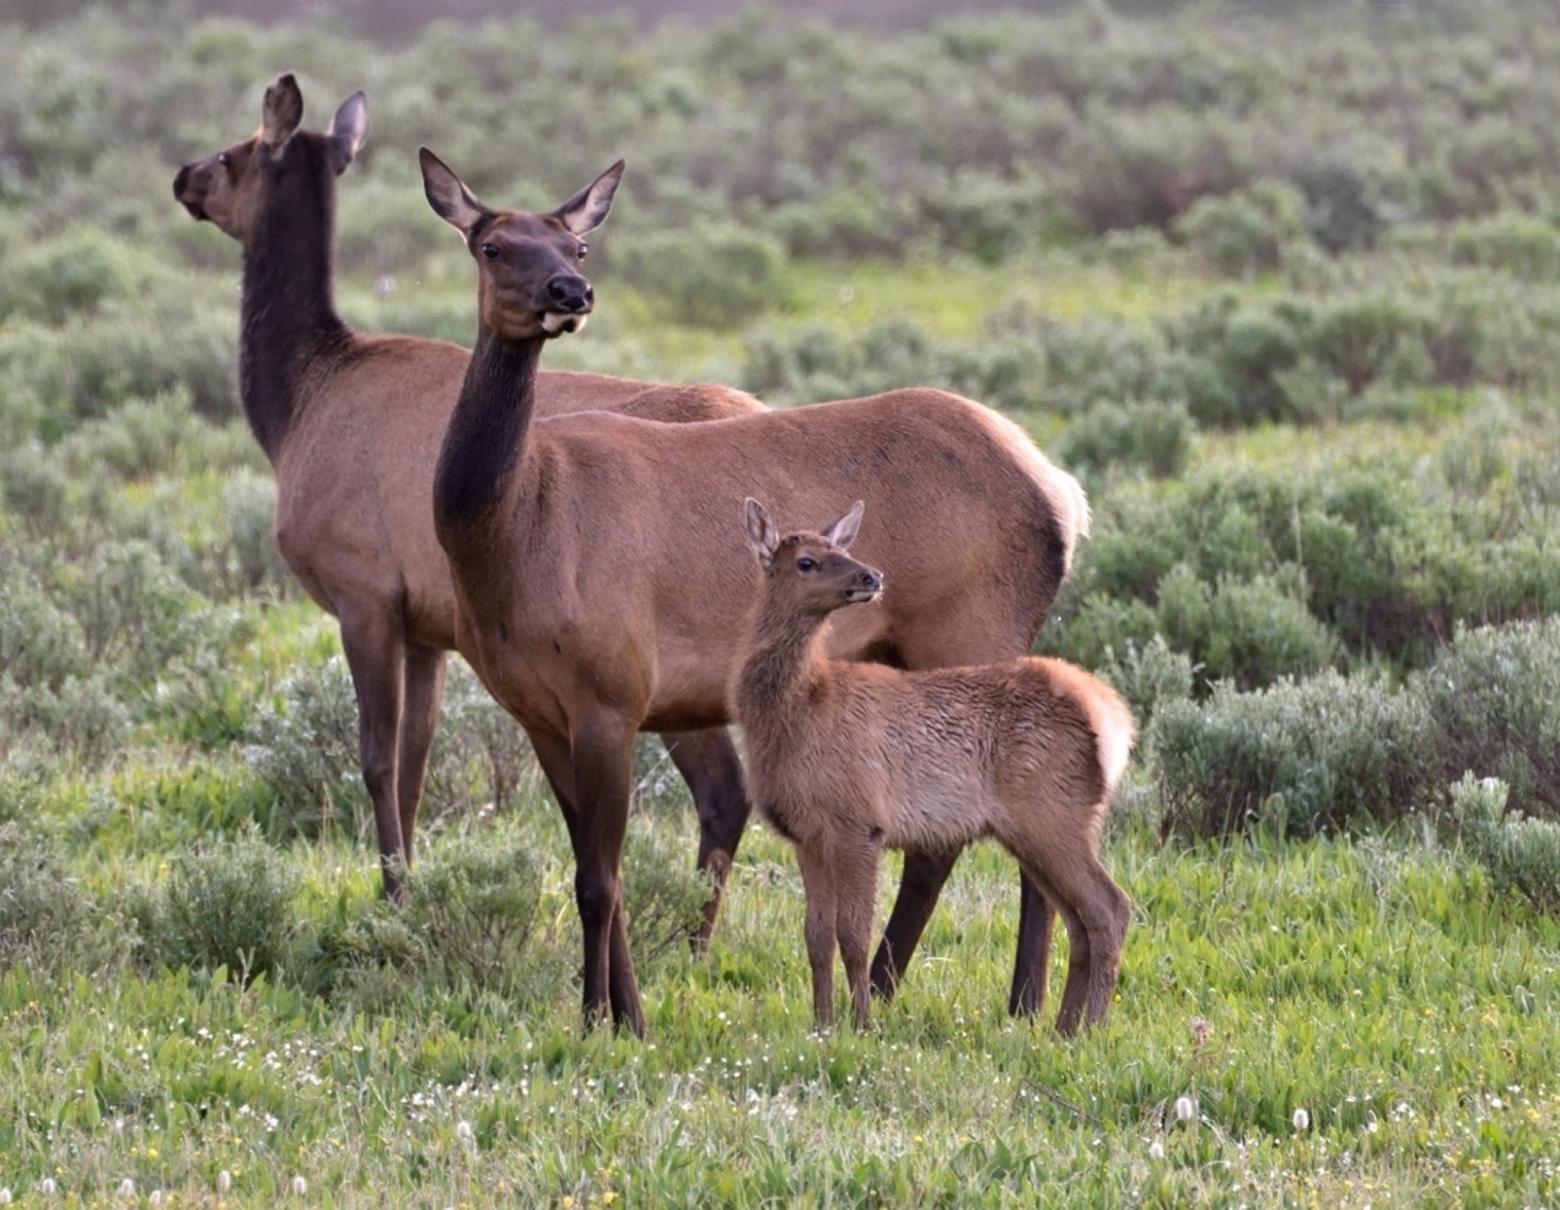 Female elk keep a watchful eye over their precious offspring. Cow-calf groups in Yellowstone are part of a great mixing pot of different elk herds that converge in Yellowstone from across the ecosystem during summer.